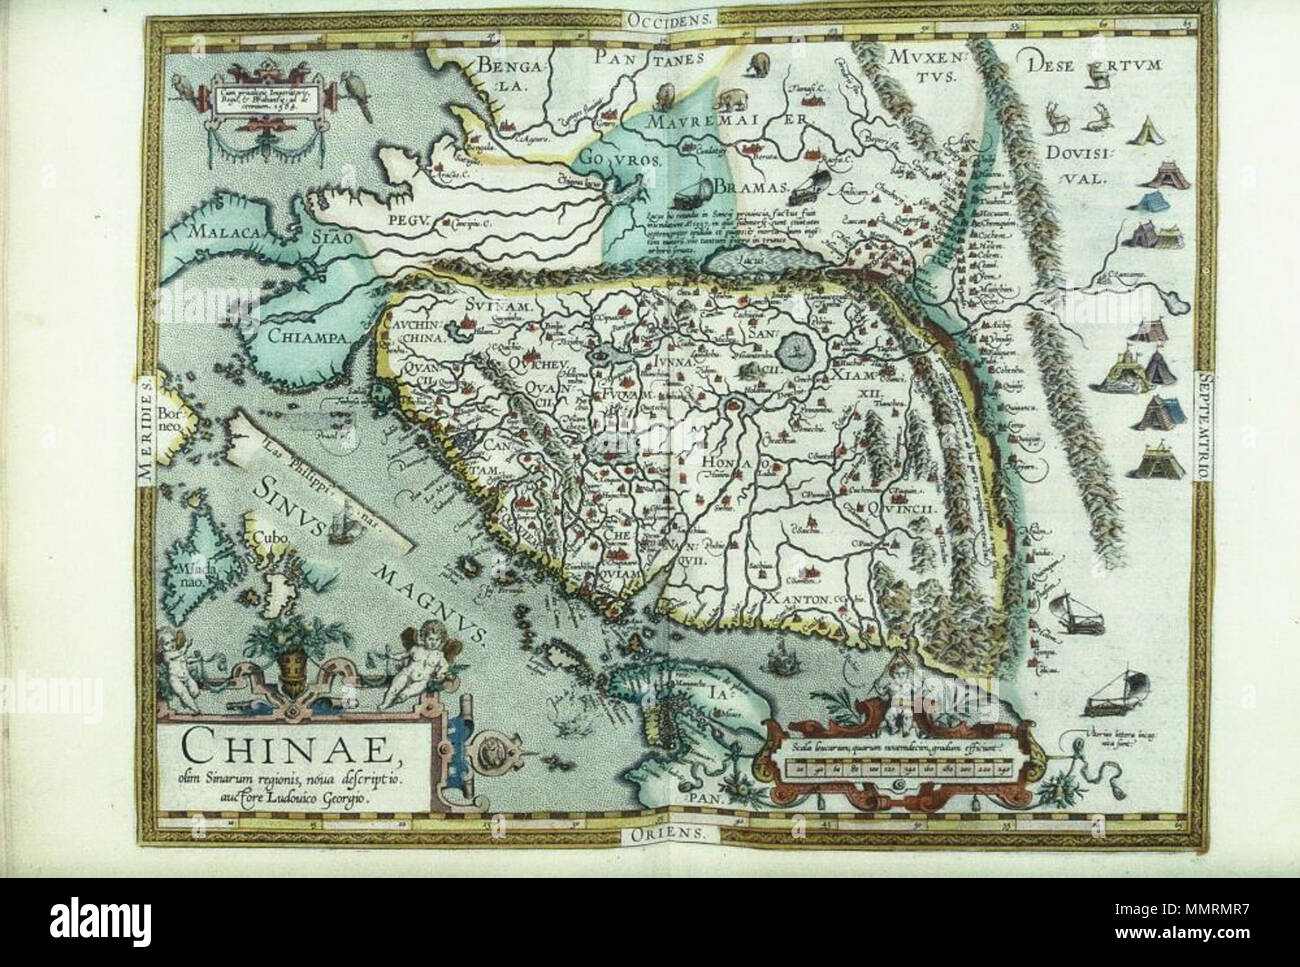 . From a manuscript by Luis Jorge de Barbuda (Ludovicus Georgius), in Abraham Ortelius, Theatrum Orbis Terrarum, English edition as The Theatre of the Whole World, London 1606  Chinae. 1606. Bodleian Libraries, Chinae Stock Photo